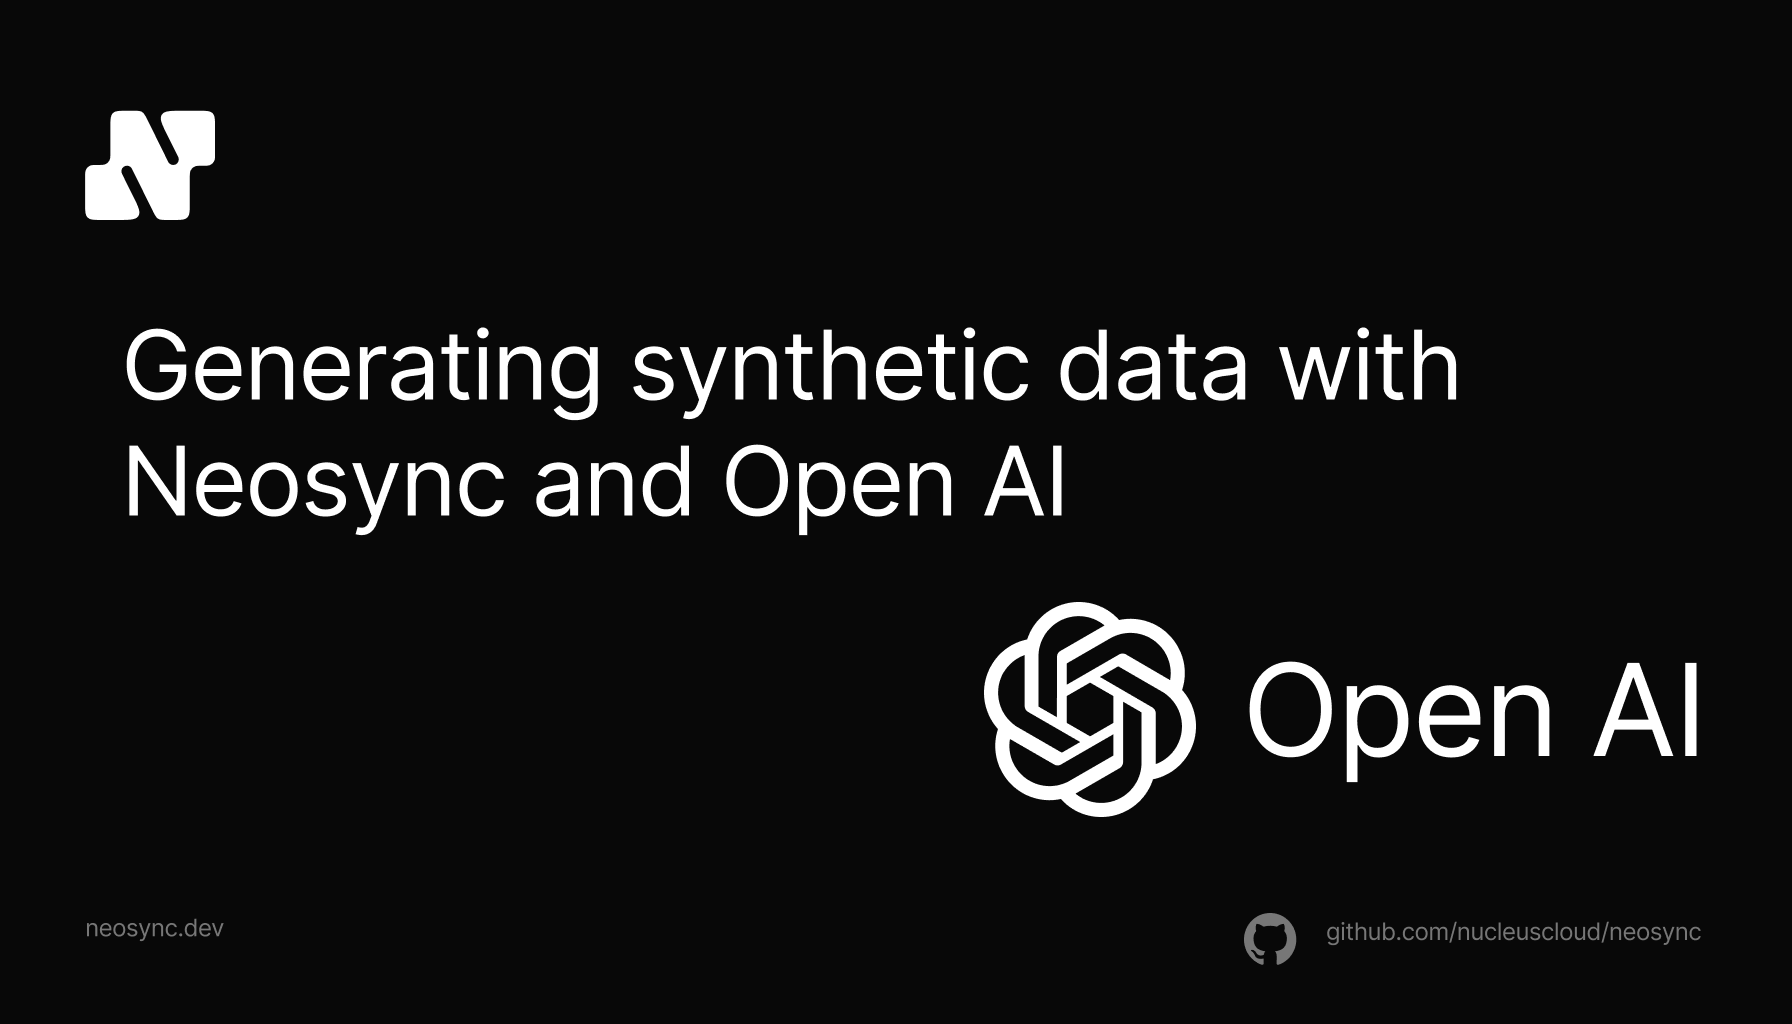 Using Neosync and OpenAI to generate synthetic data